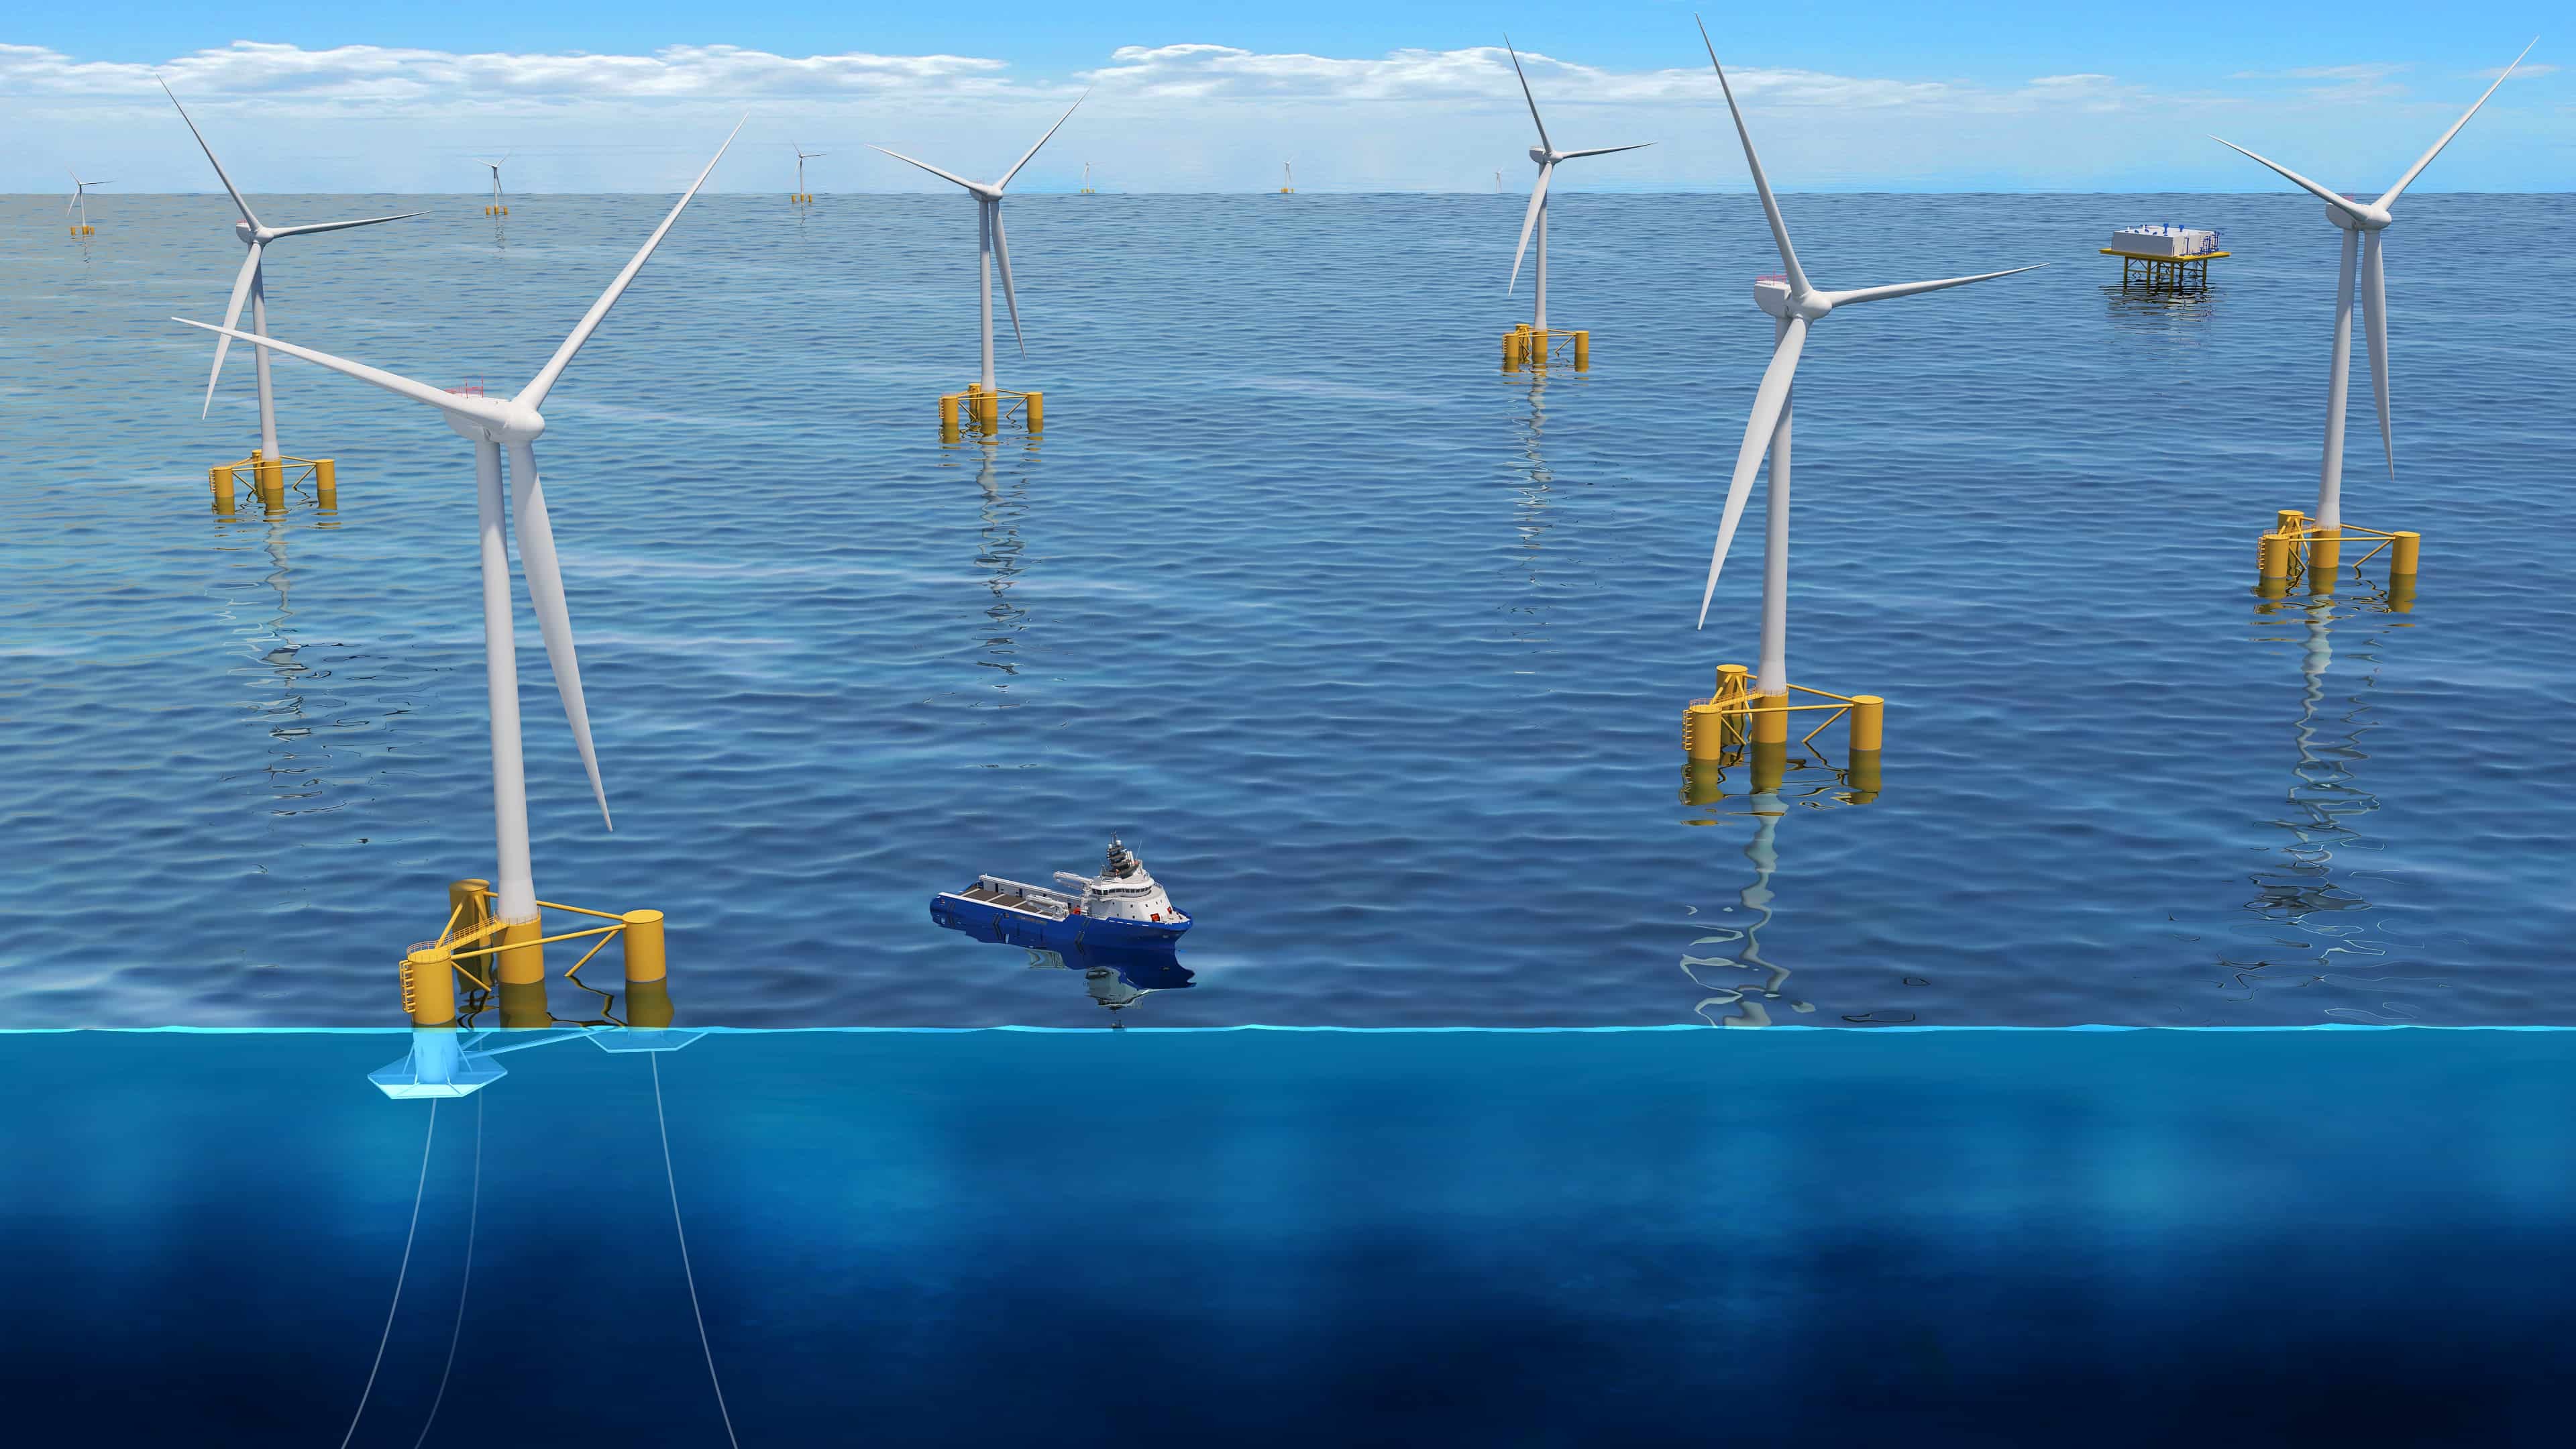 a graphic rendering of multiple floating wind turbines in a body of water and a boat.